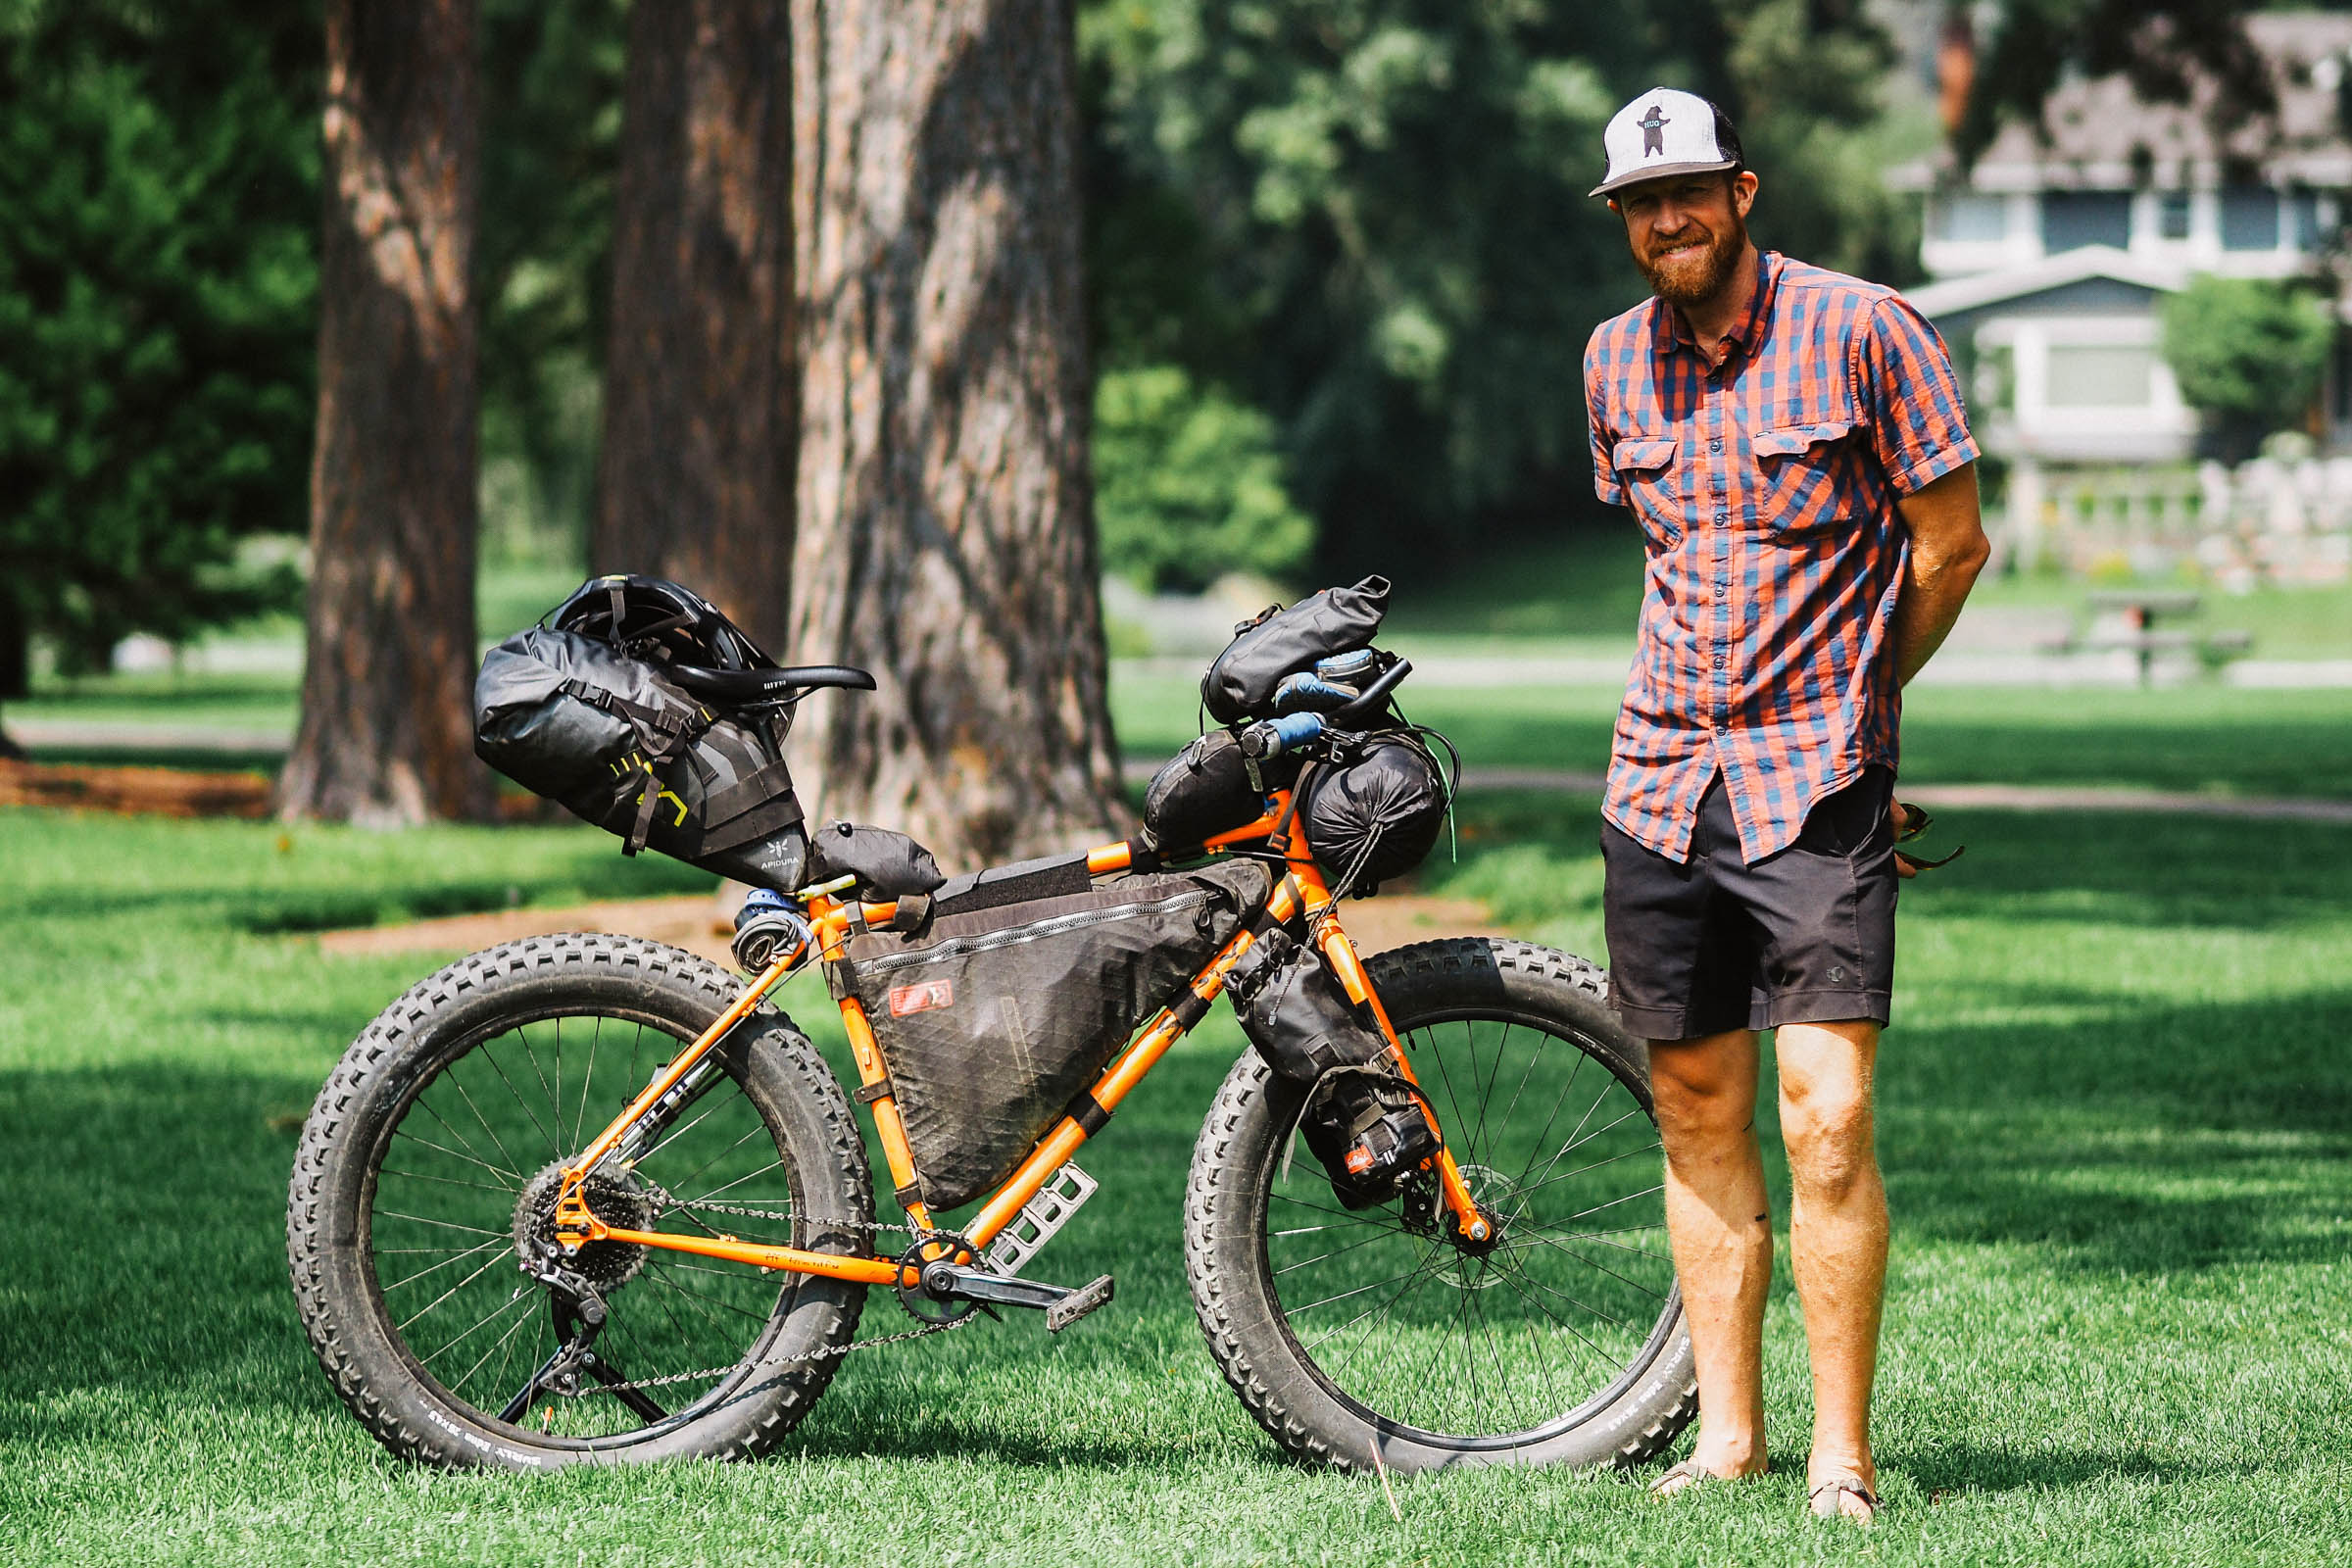 Ryan Carruth's Surly Pugsley